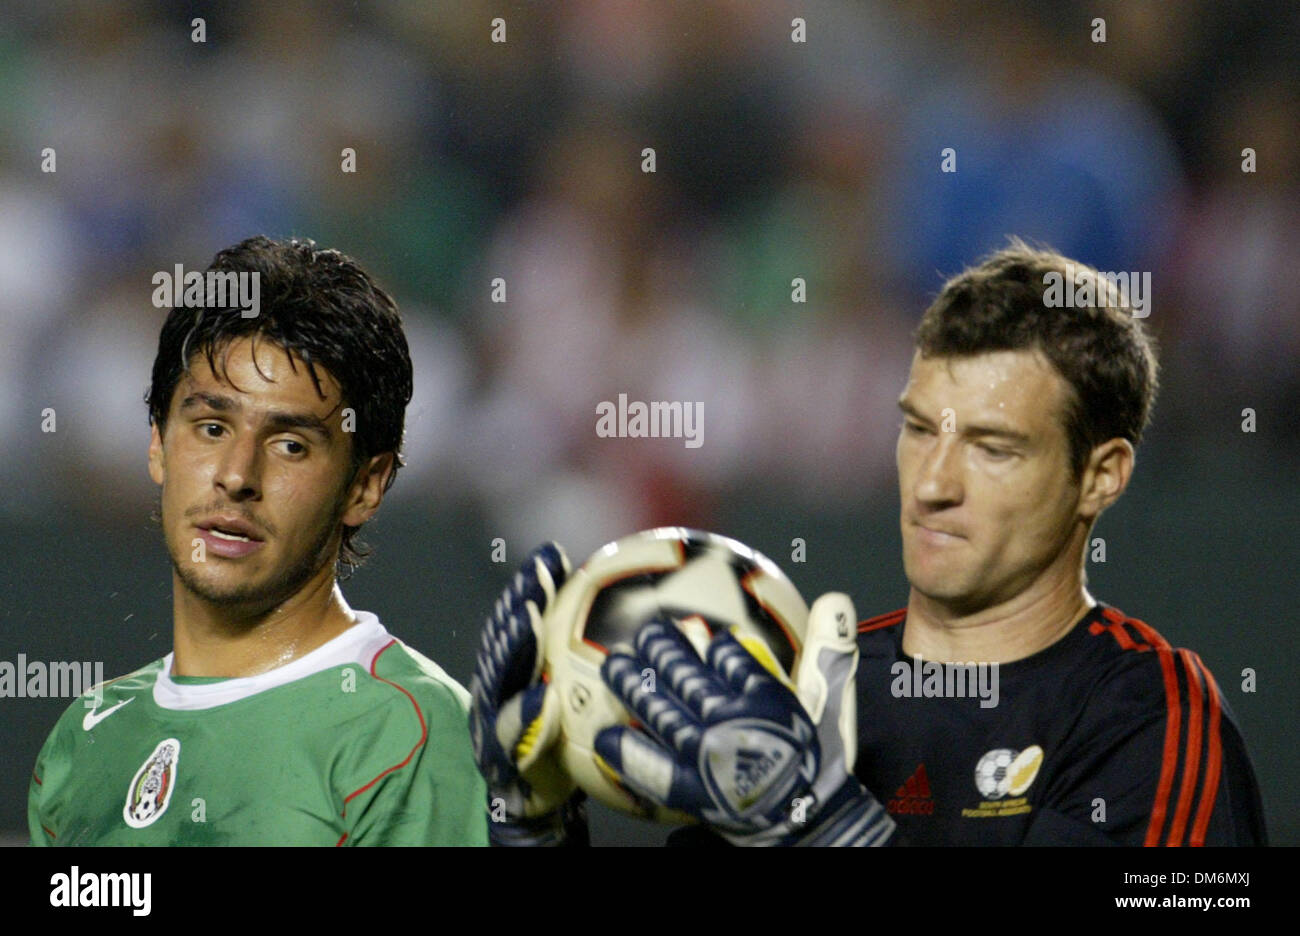 Jul 08, 2005; Carson, CA, USA;  Rafael Marquez Lugo of Mexico (L) looks over (1) Golie Calvin Marlin  of South Africa as he stops  a shot on goal during the second half of their Confederation of North, Central American and Caribbean Association Football (CONCACAF) Gold Cup soccer match in Carson, California July 8, 2005 South Africa won the game 2 to 1 Mandatory Credit: Photo by Ar Stock Photo